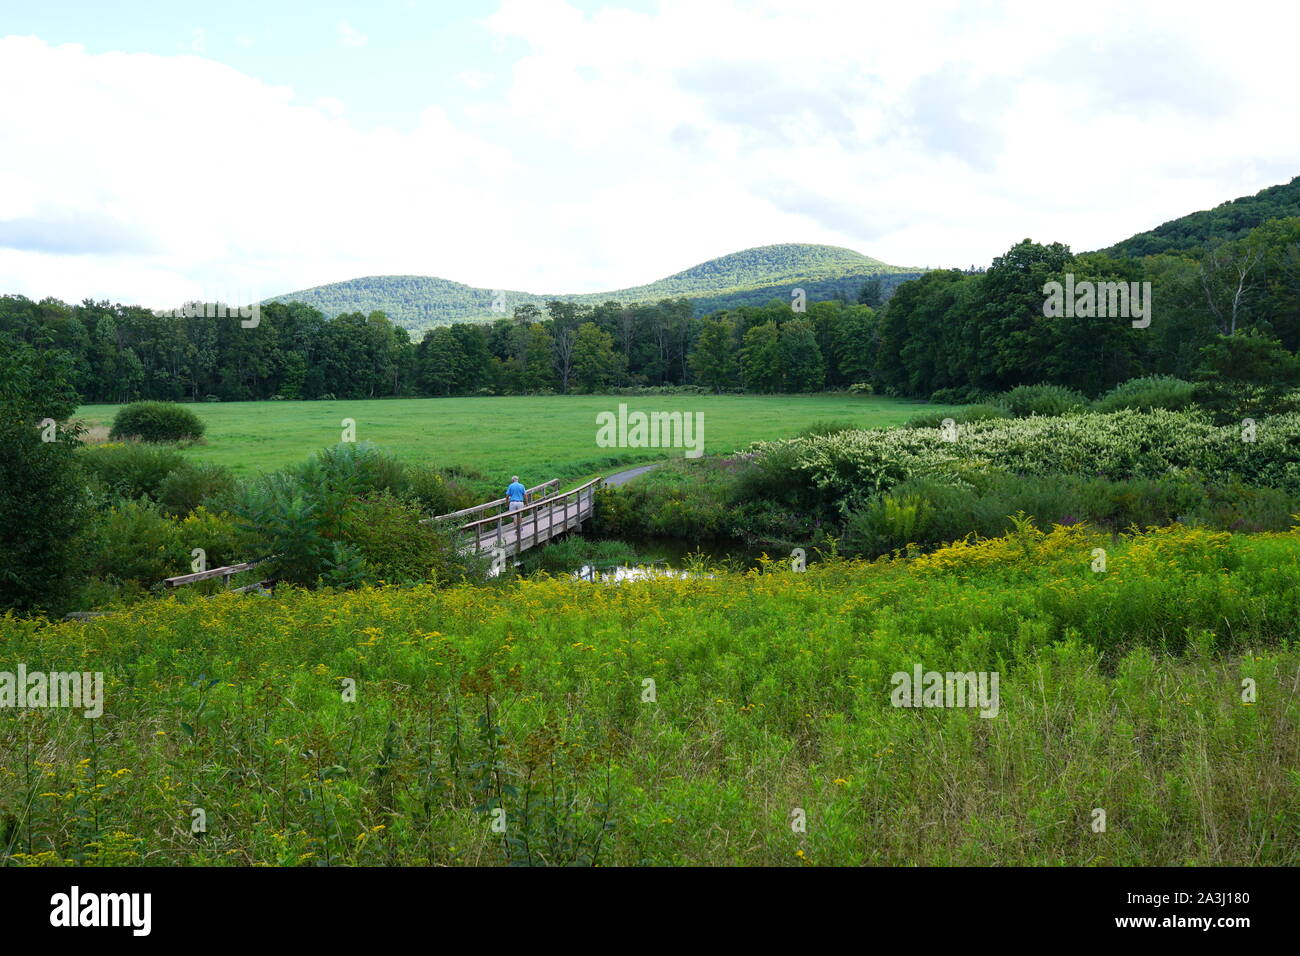 Picturesque landscape of The Windham Path in the Catskills area, Upstate New York, USA Stock Photo